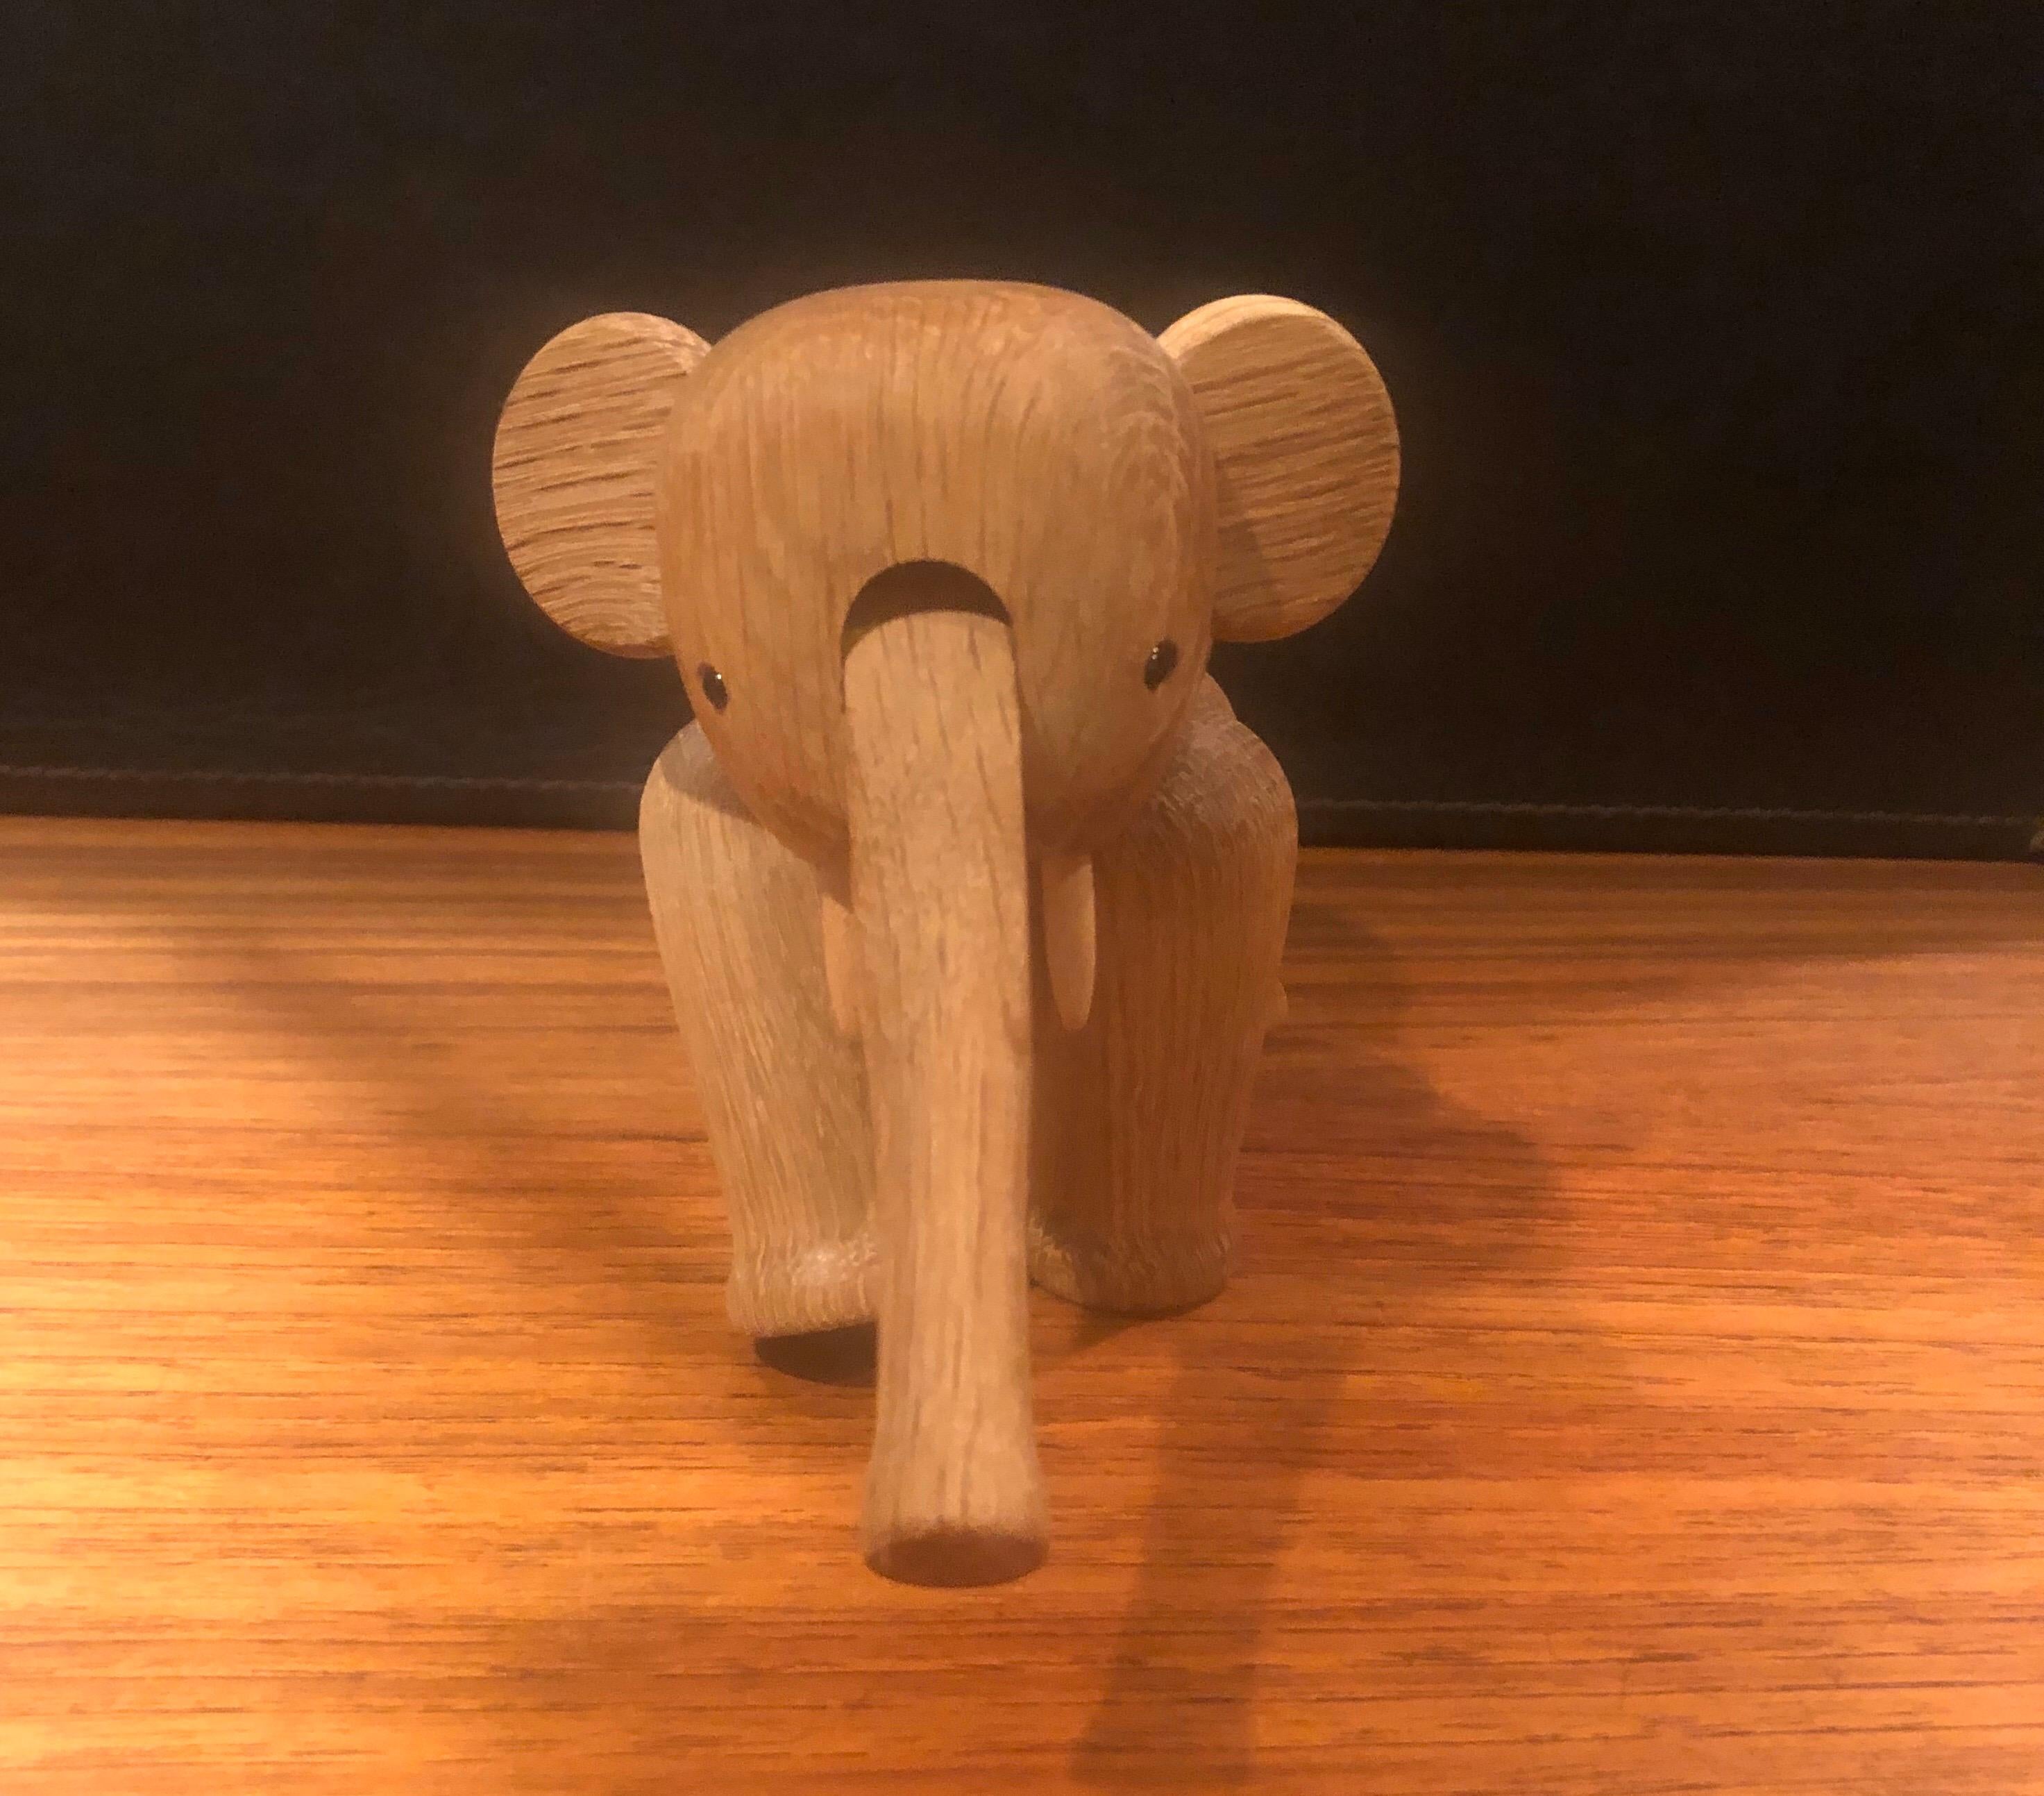 Articulated toy elephant by Kay Bojesen, circa 1990s. #1469

Kay Bojesen's elephant, born in 1953, is a world-famous Classic for children and adults alike. With its good natured expression, the elephant is a faithful companion all the way from the